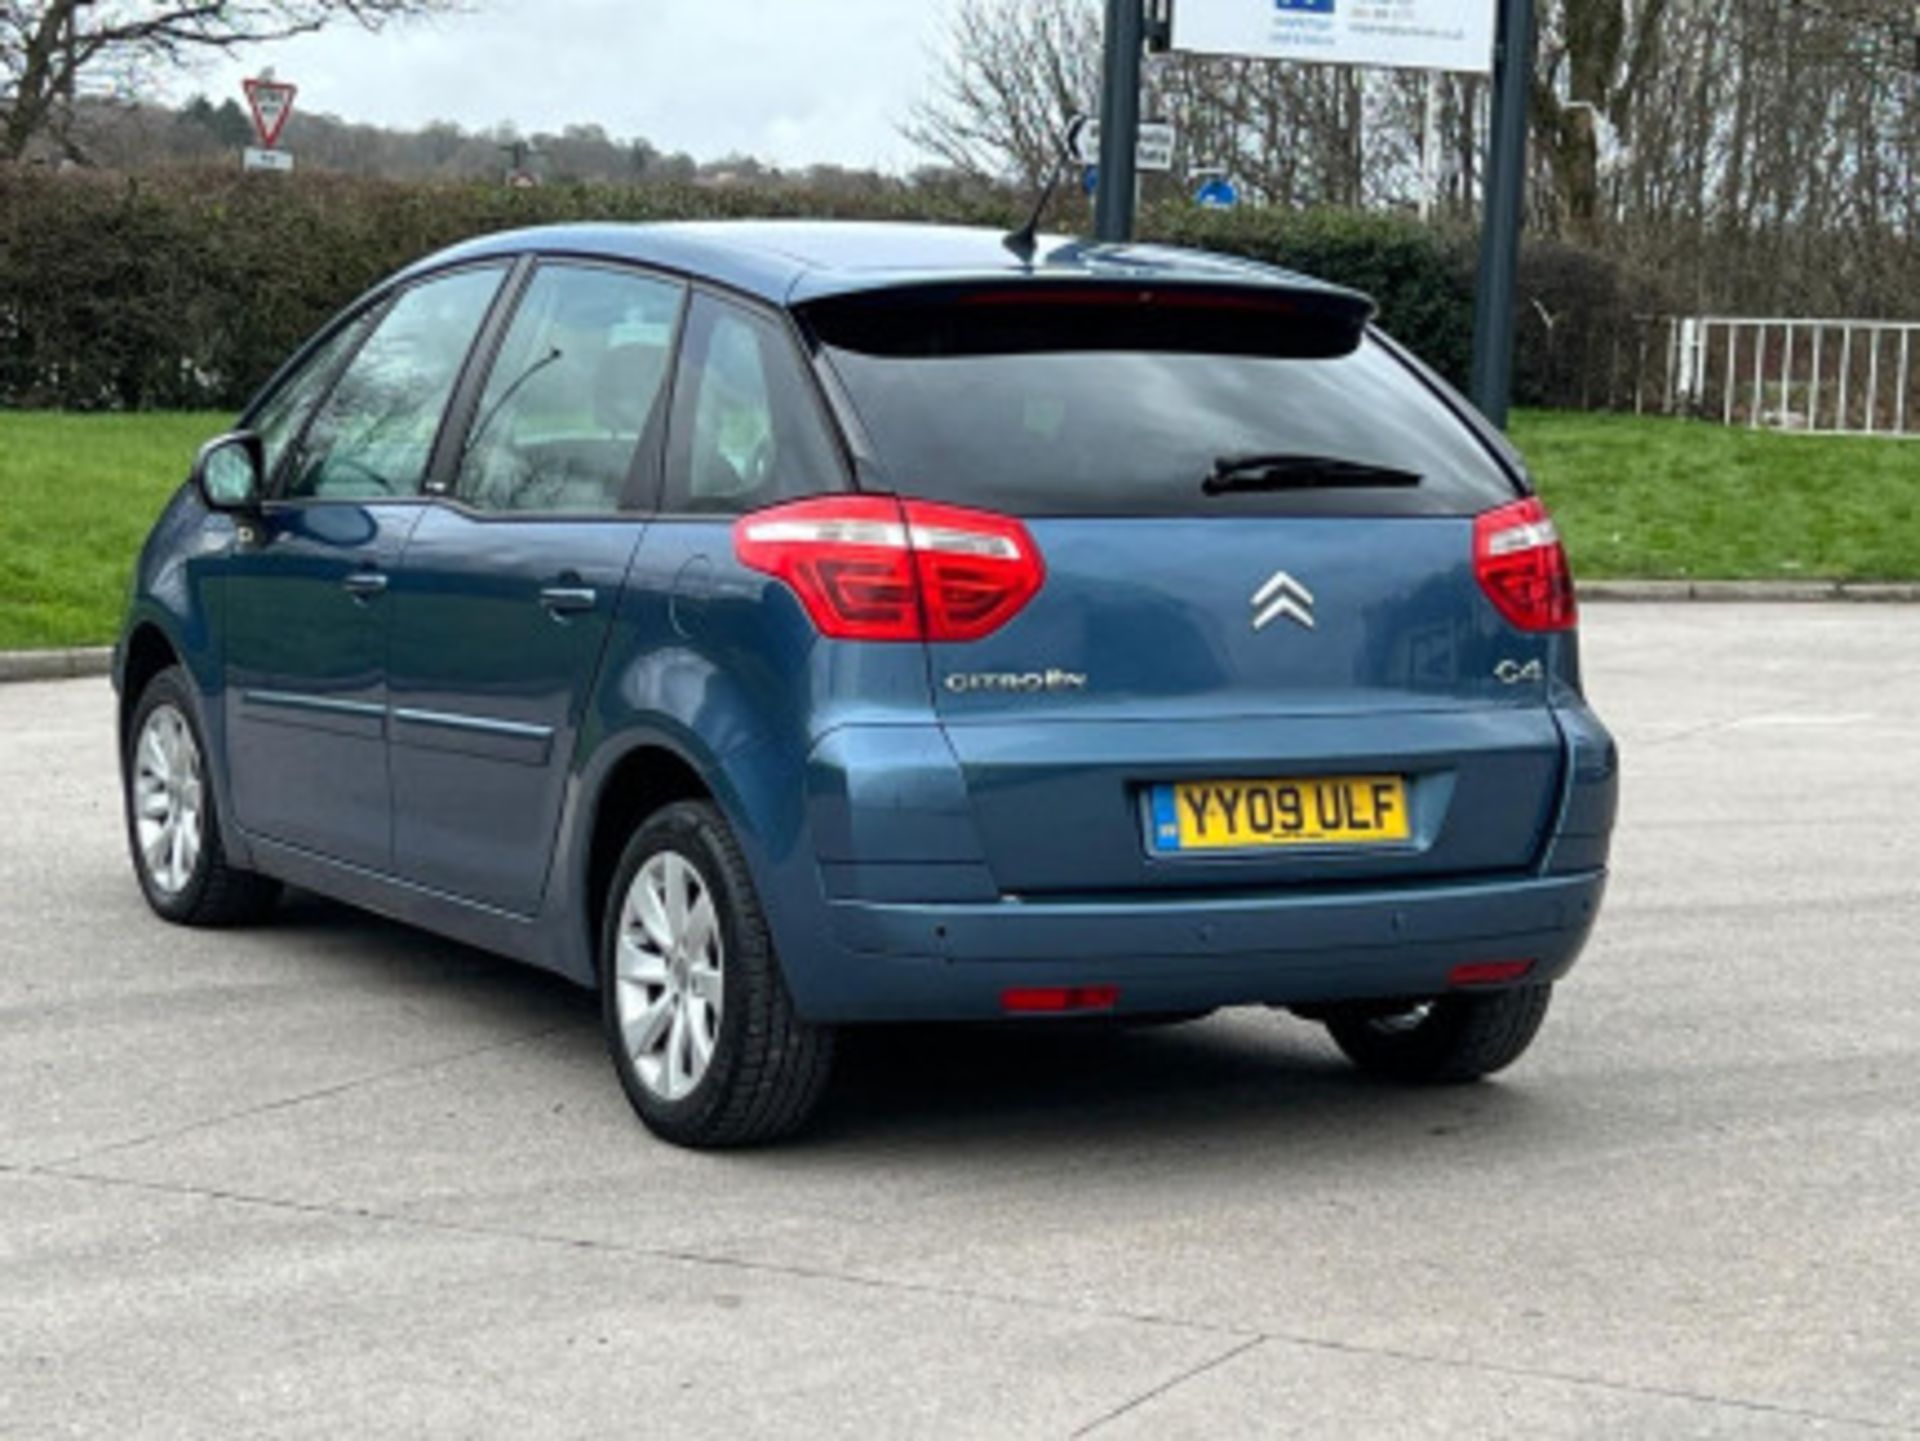 2009 CITROEN C4 PICASSO 1.6 HDI VTR+ EGS6 5DR >>--NO VAT ON HAMMER--<< - Image 52 of 123